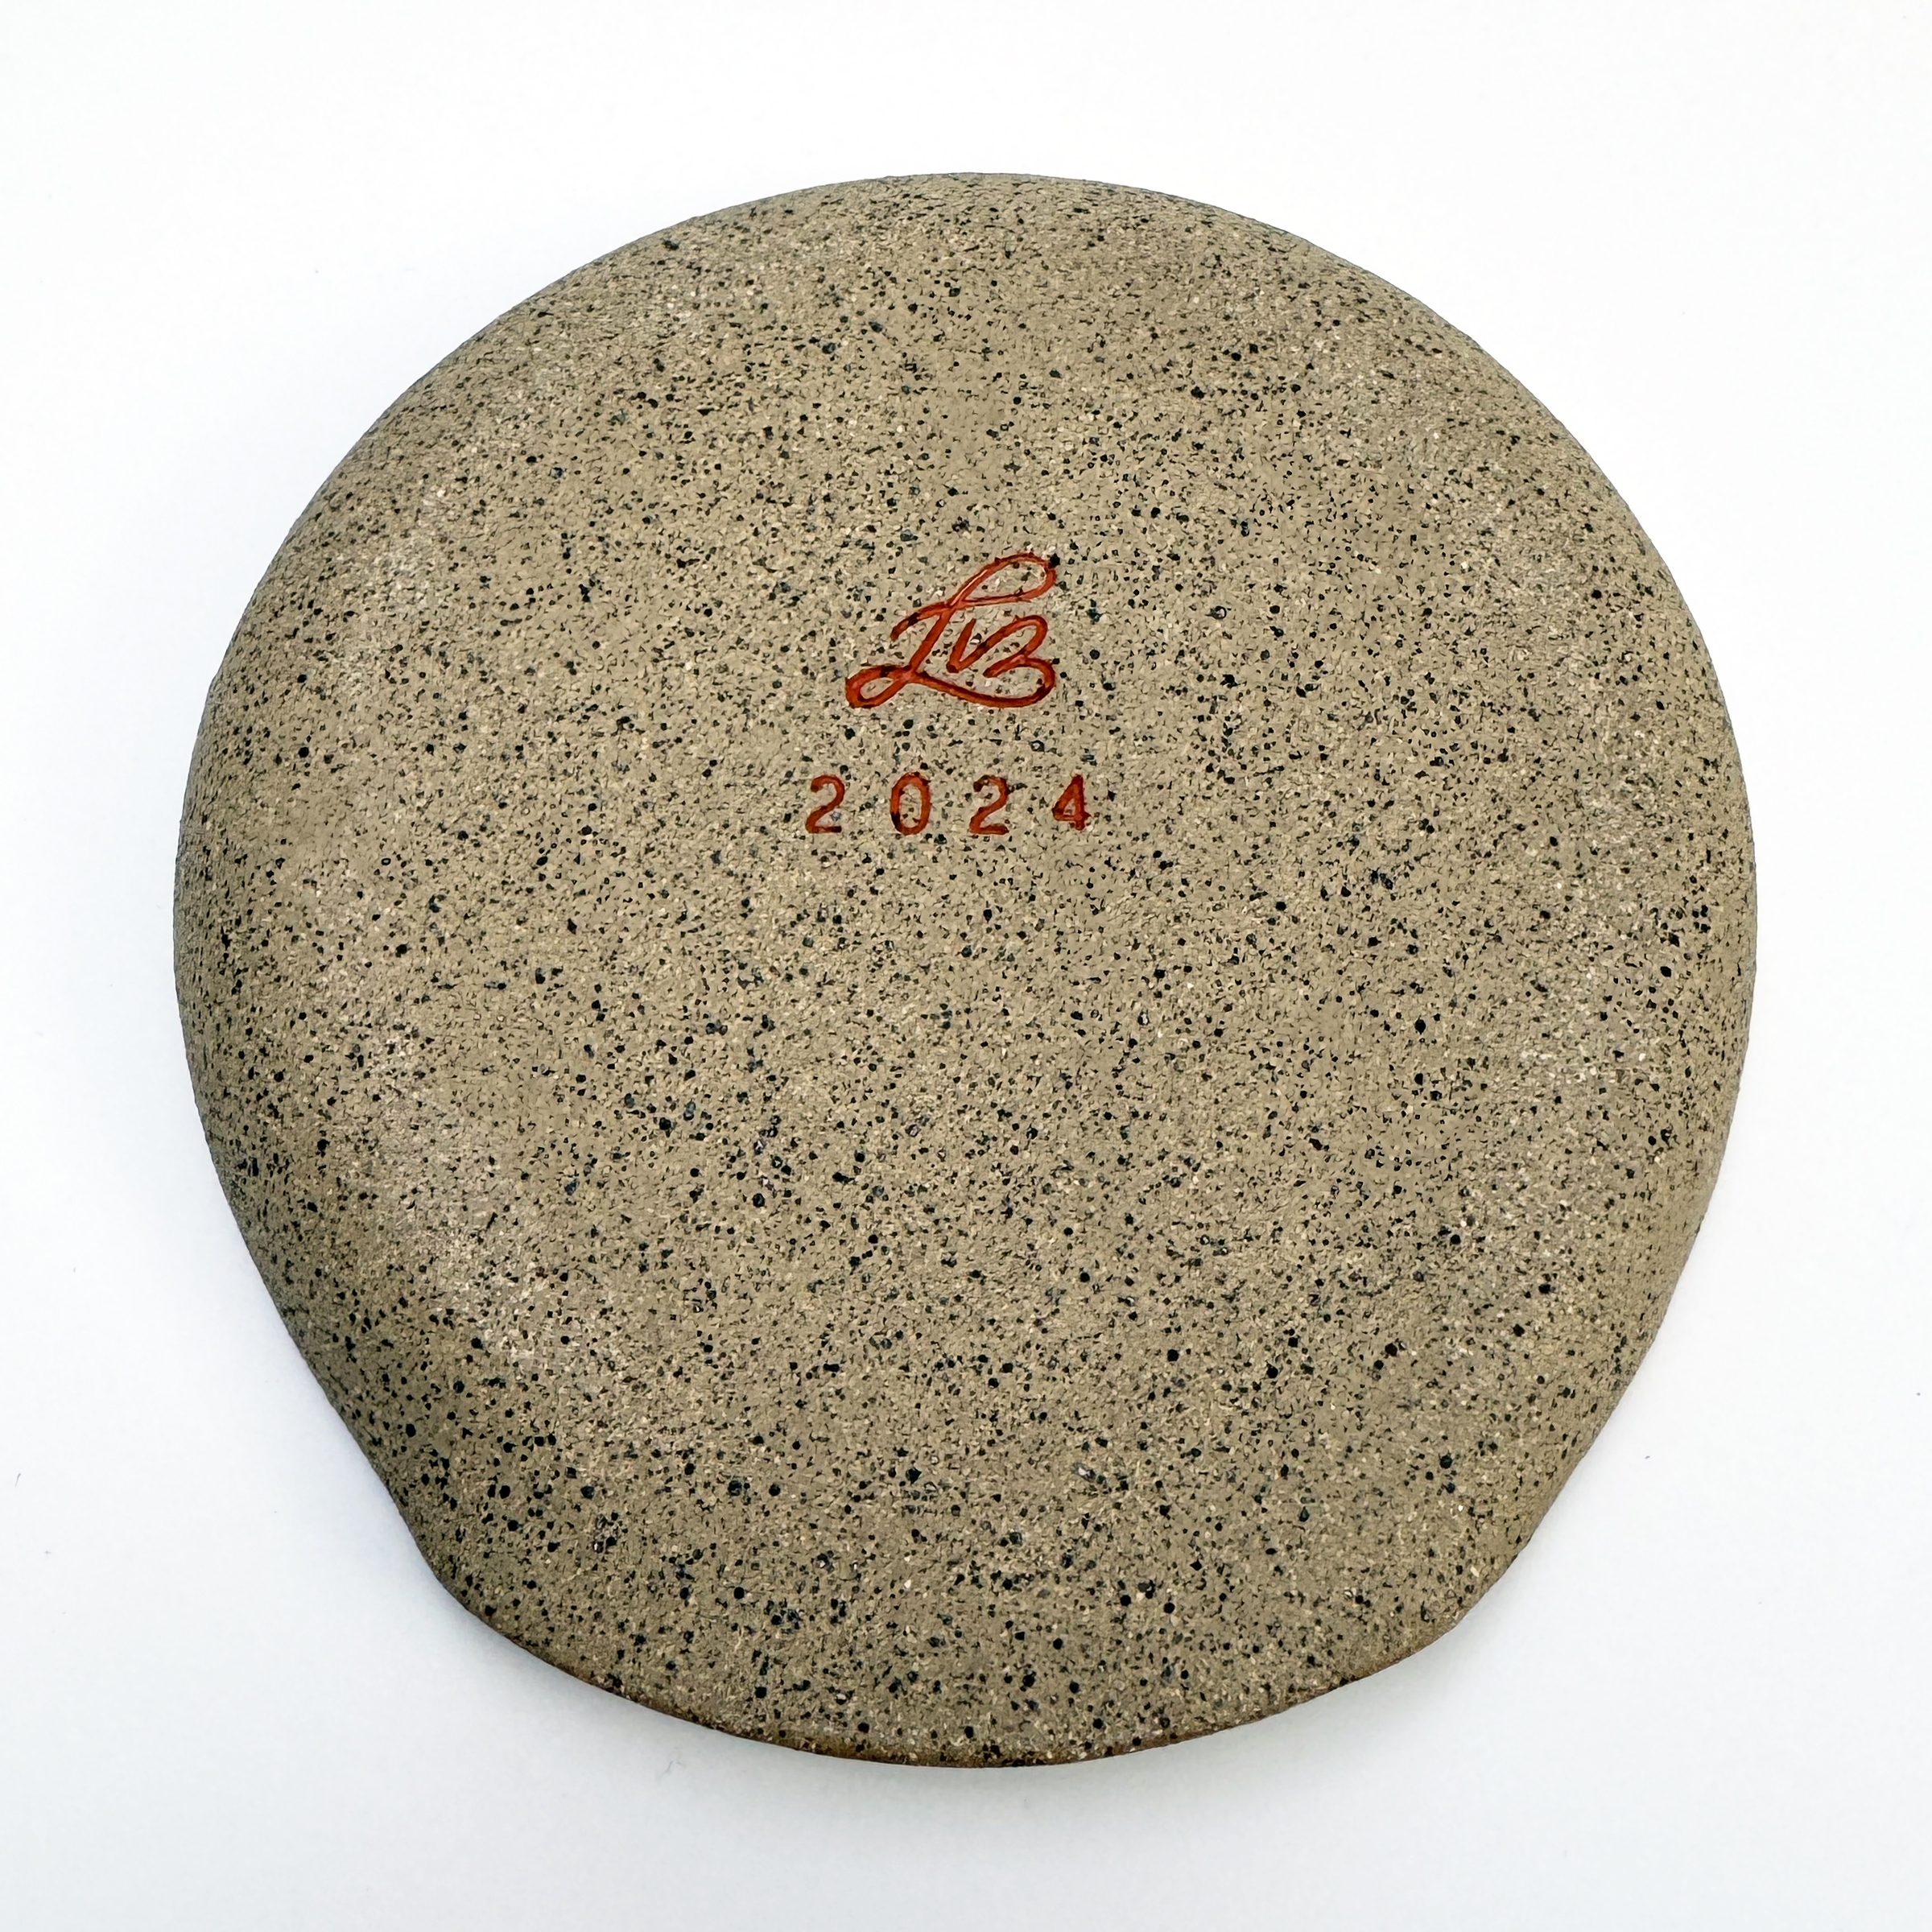 The edges and the bottom are unglazed to show off the raw tan stoneware clay and its speckles. The bottom is completely smooth and has no foot. Translucent orange gloss glaze is in the signature.